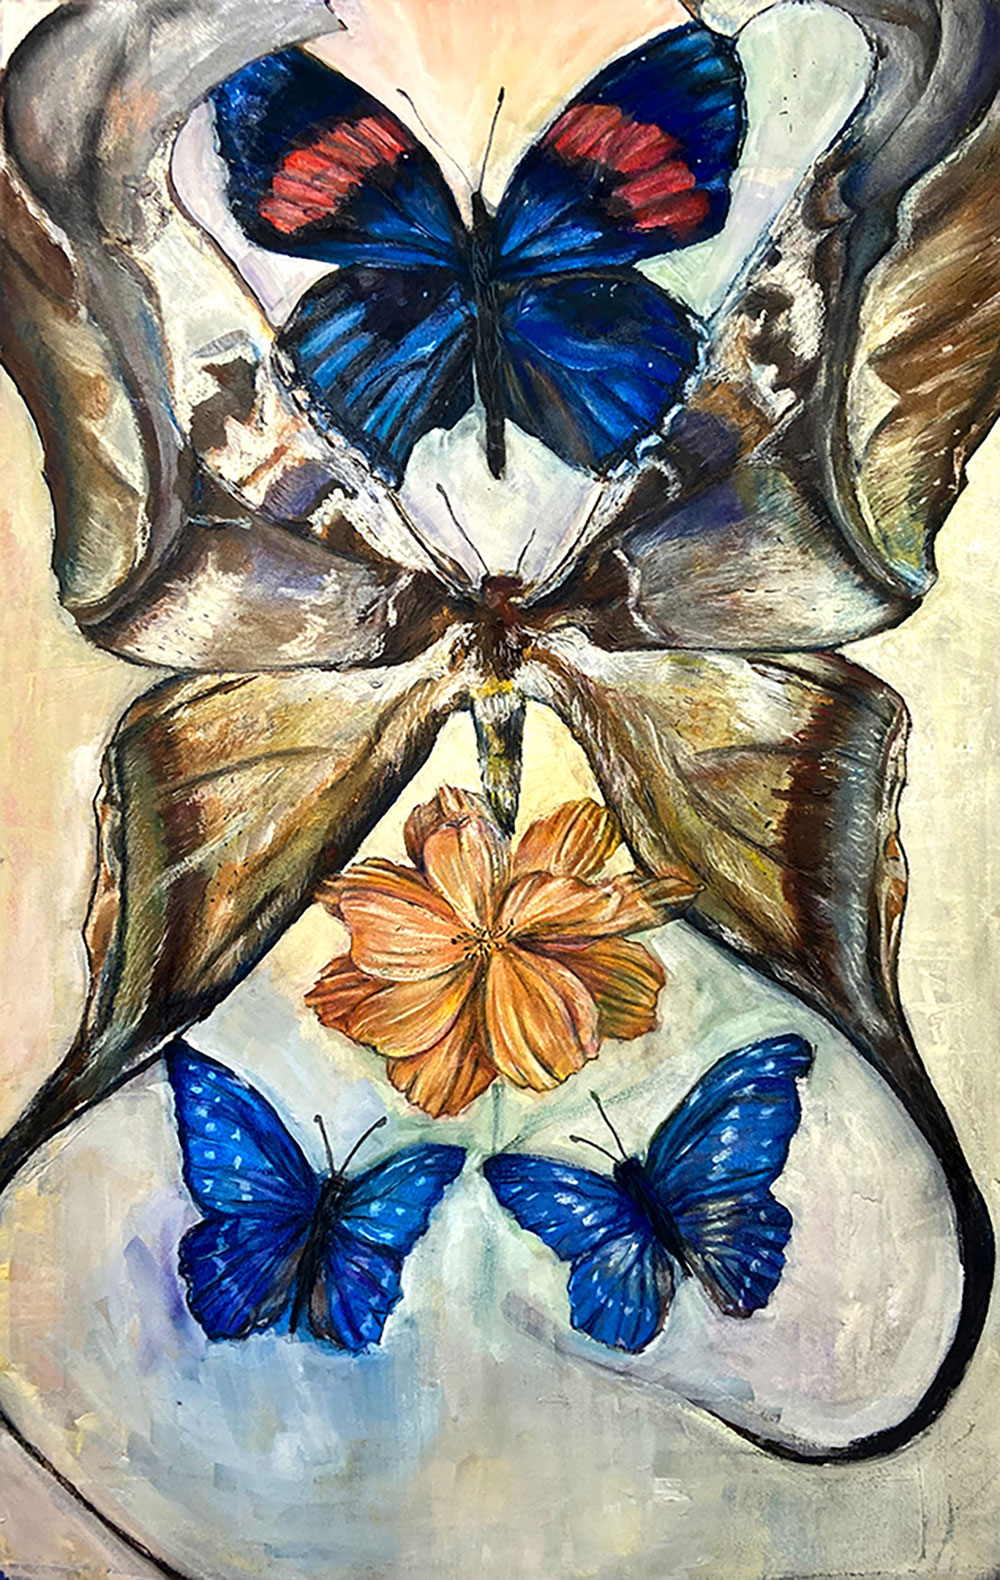 A drawing of several colorful butterflies